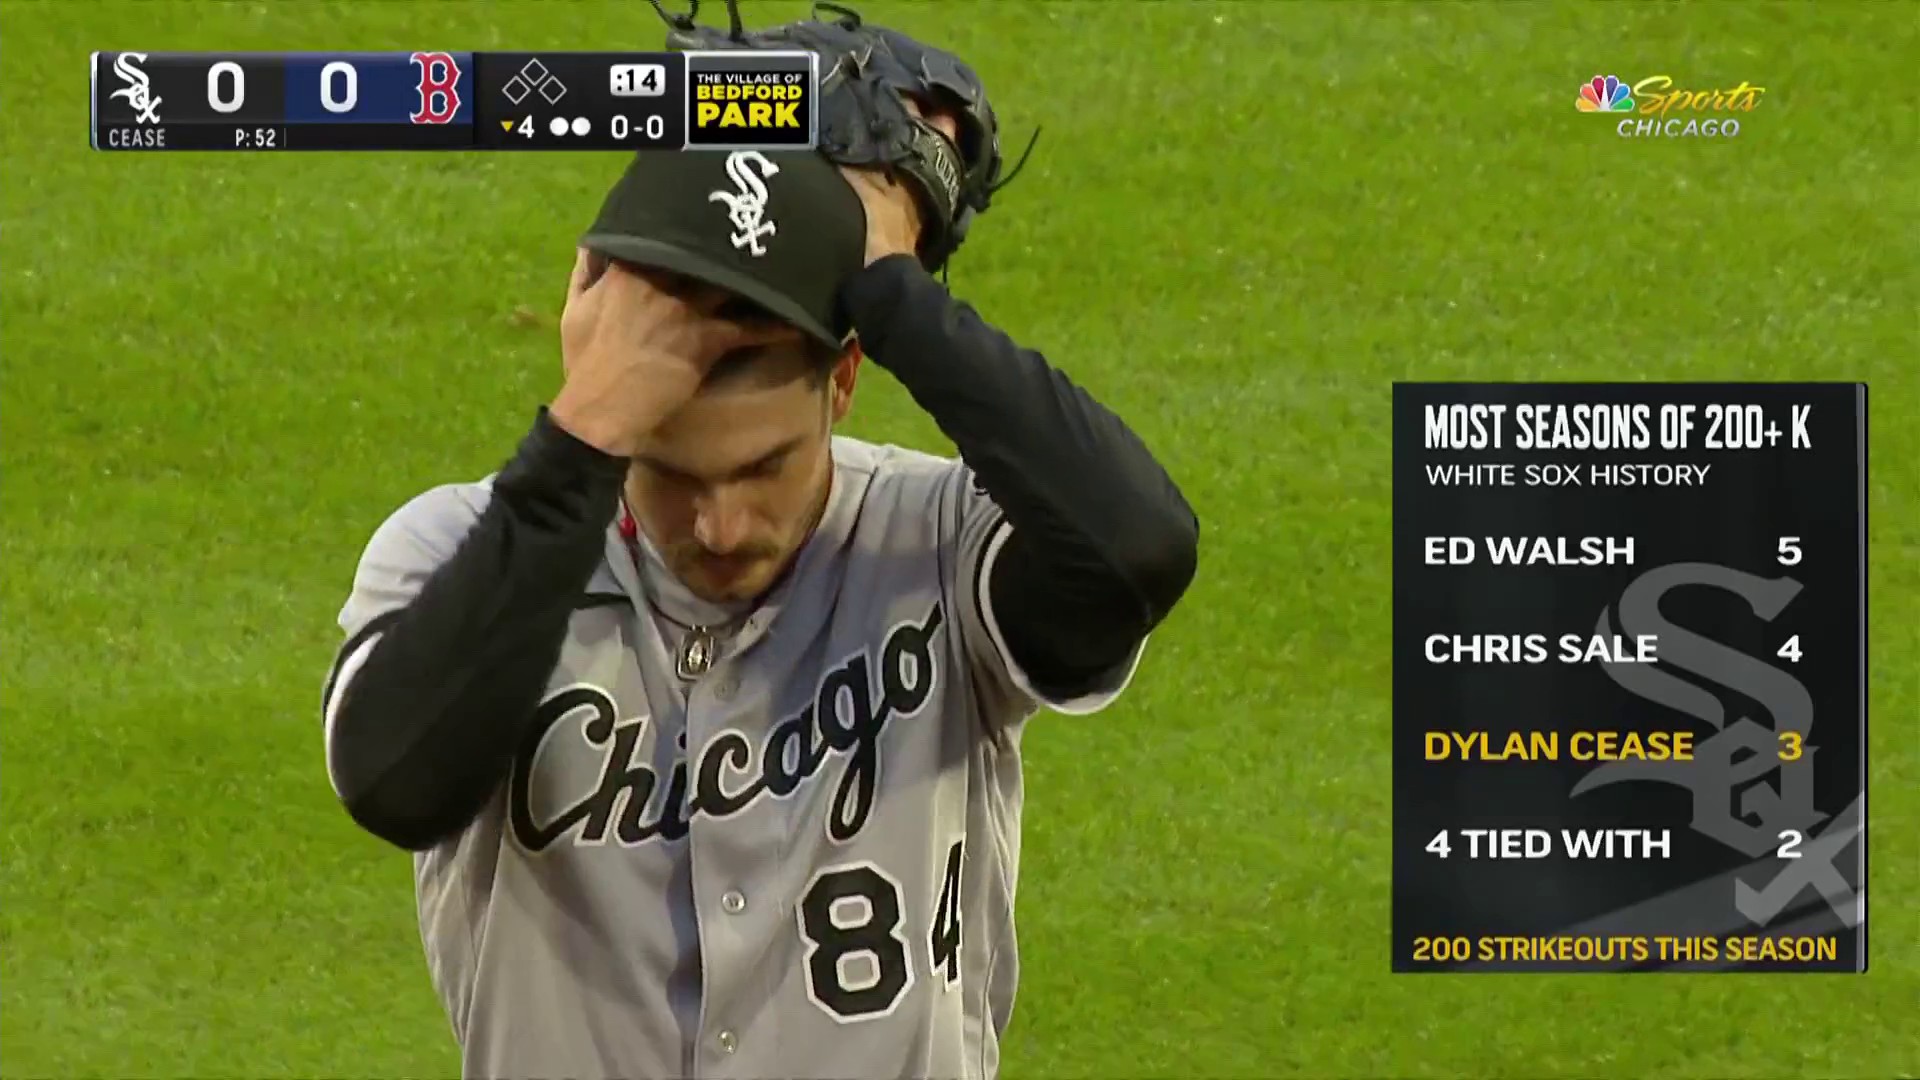 White Sox Dylan Cease throws 200th strikeout of the season